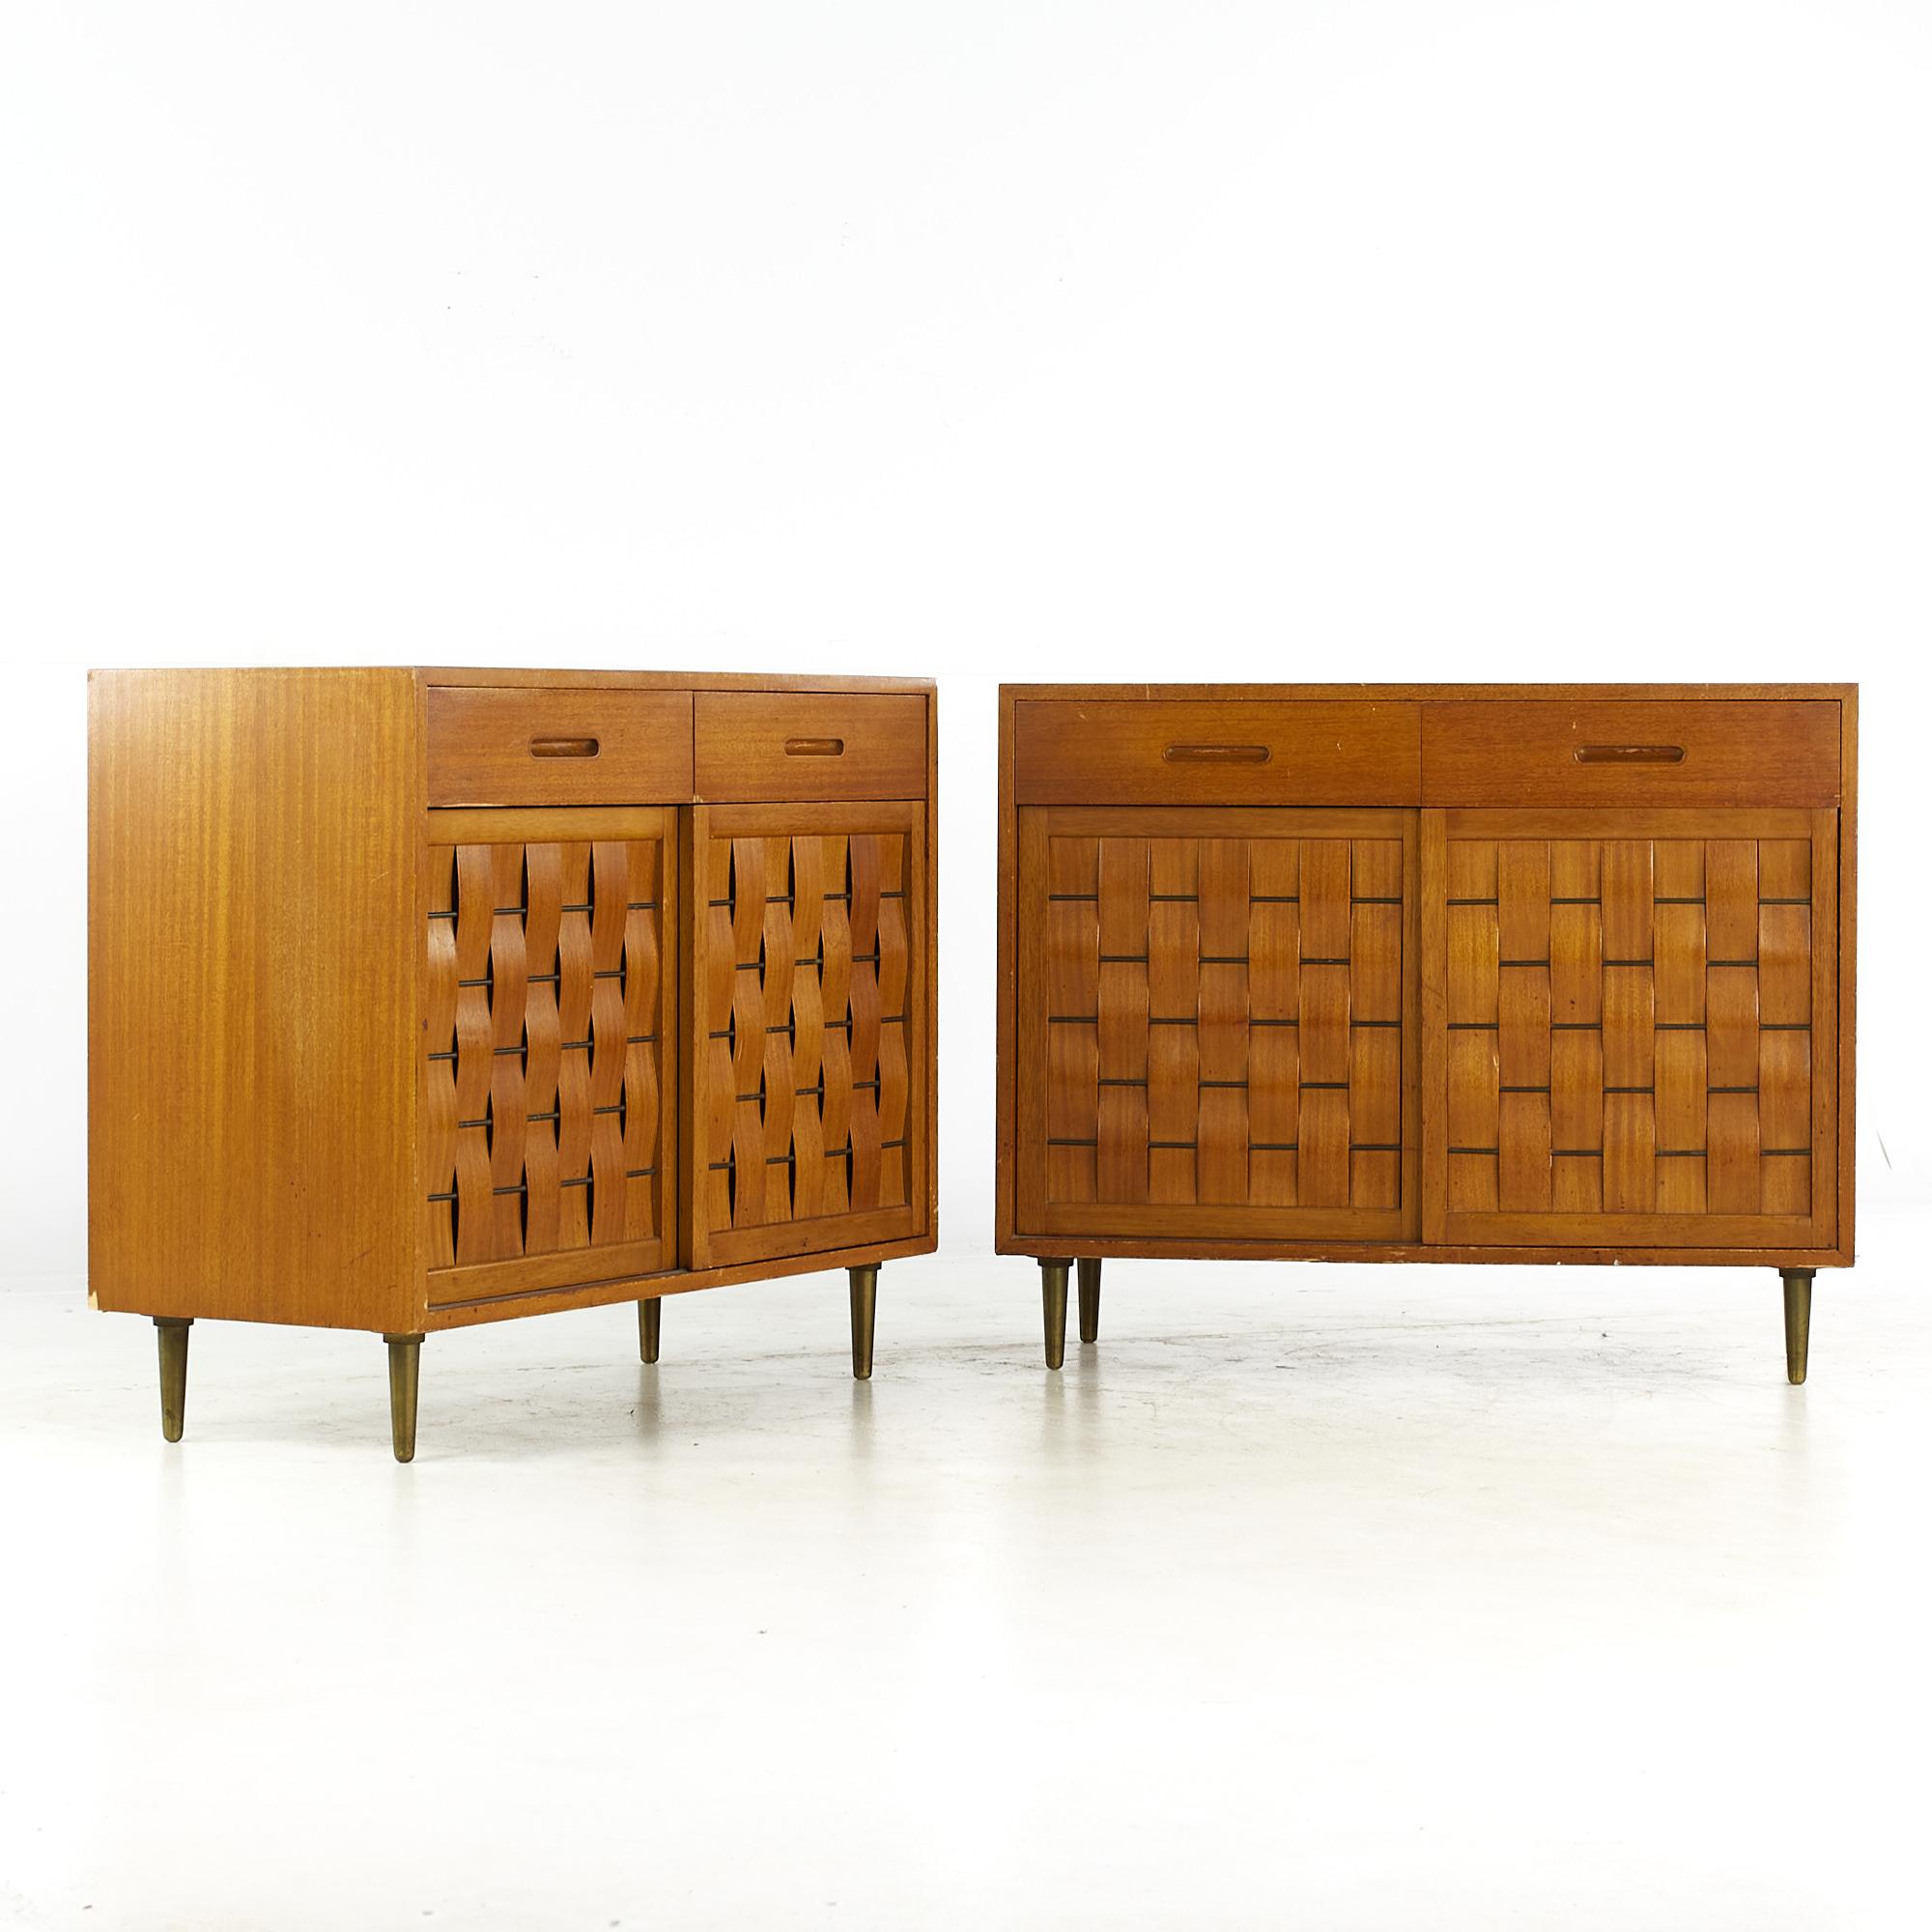 Edward Wormley for Dunbar mid-century bleached mahogany sliding door credenza - pair.

Each credenza measures: 41.5 wide x 18 deep x 34 inches high.

All pieces of furniture can be had in what we call restored vintage condition. That means the